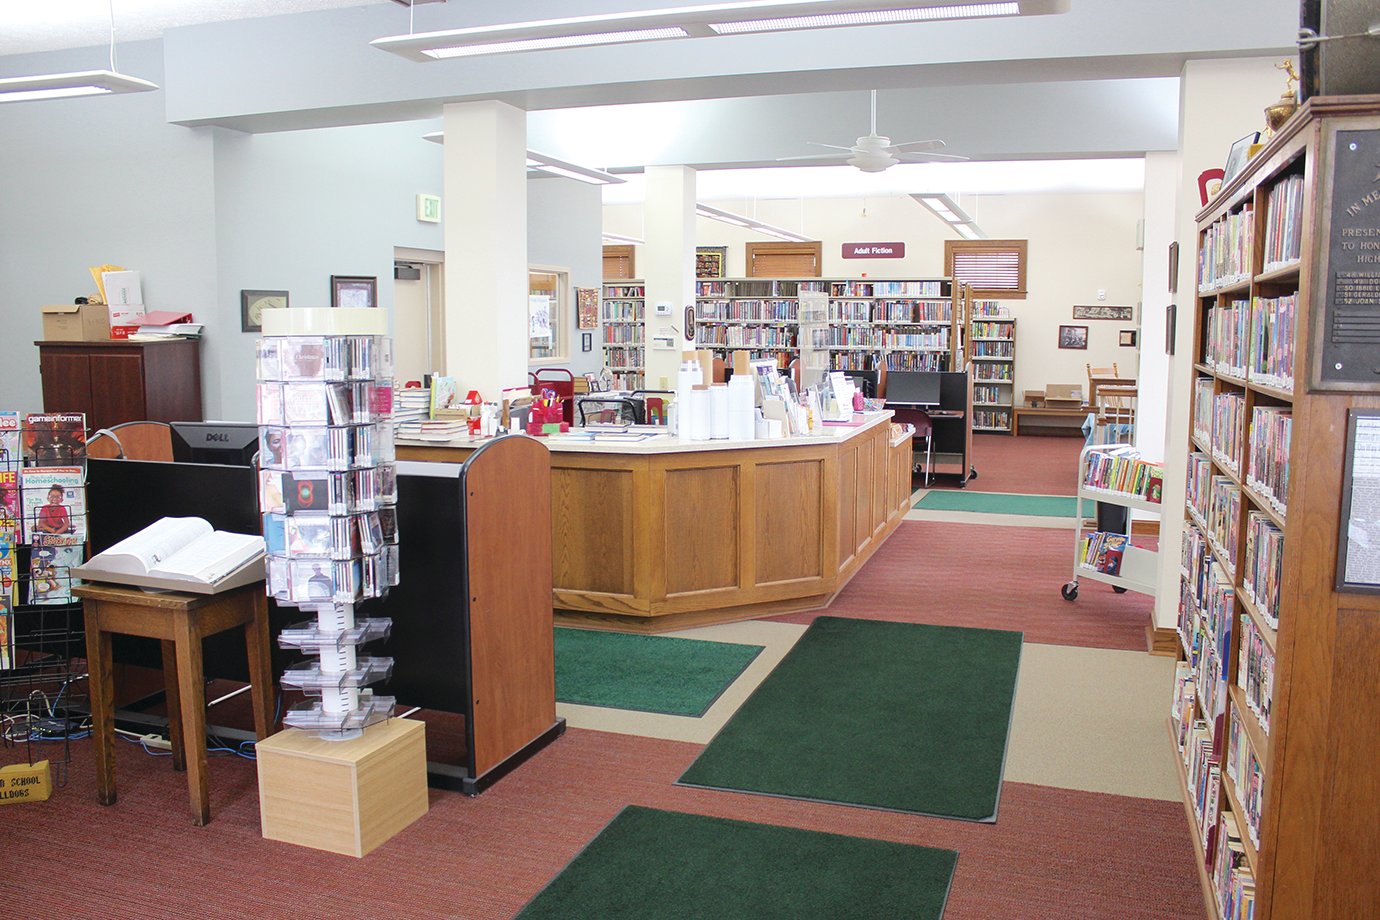 The first floor of the Linden Public Library welcomes visitors to a freshly-renovated-yet-historic facility.